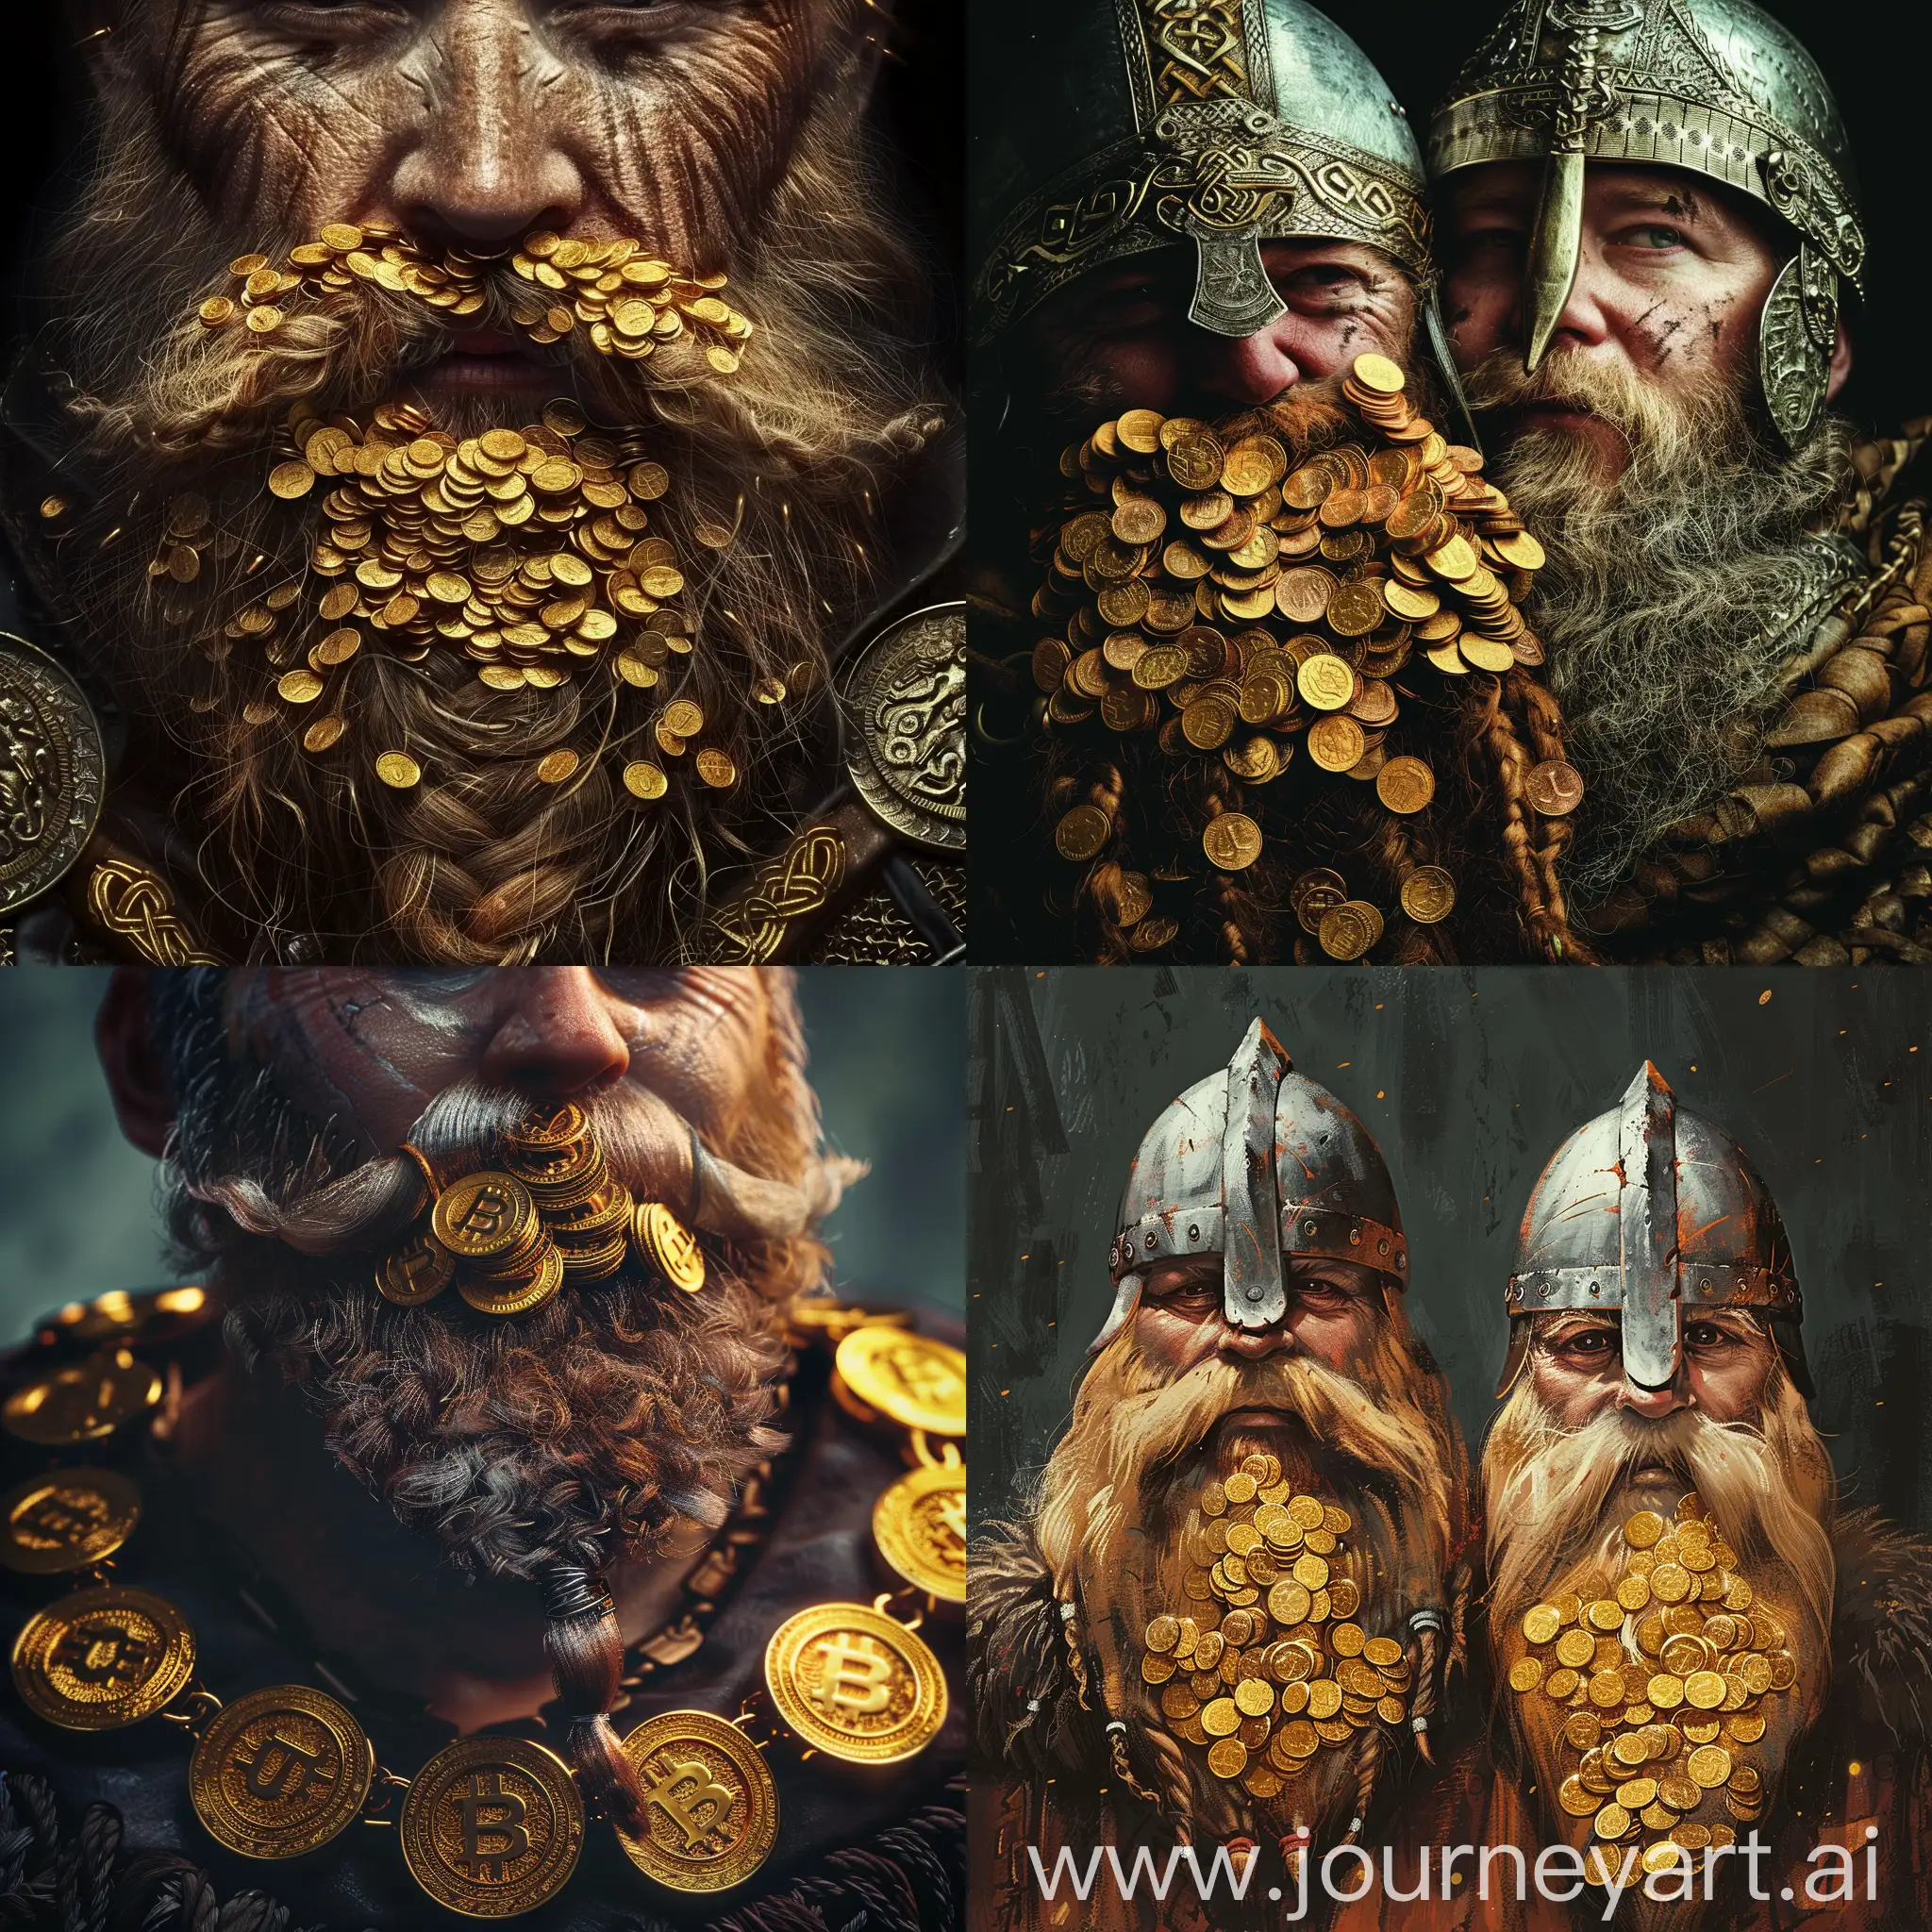 Vikings-Collecting-Gold-Coins-Ancient-Warriors-with-Riches